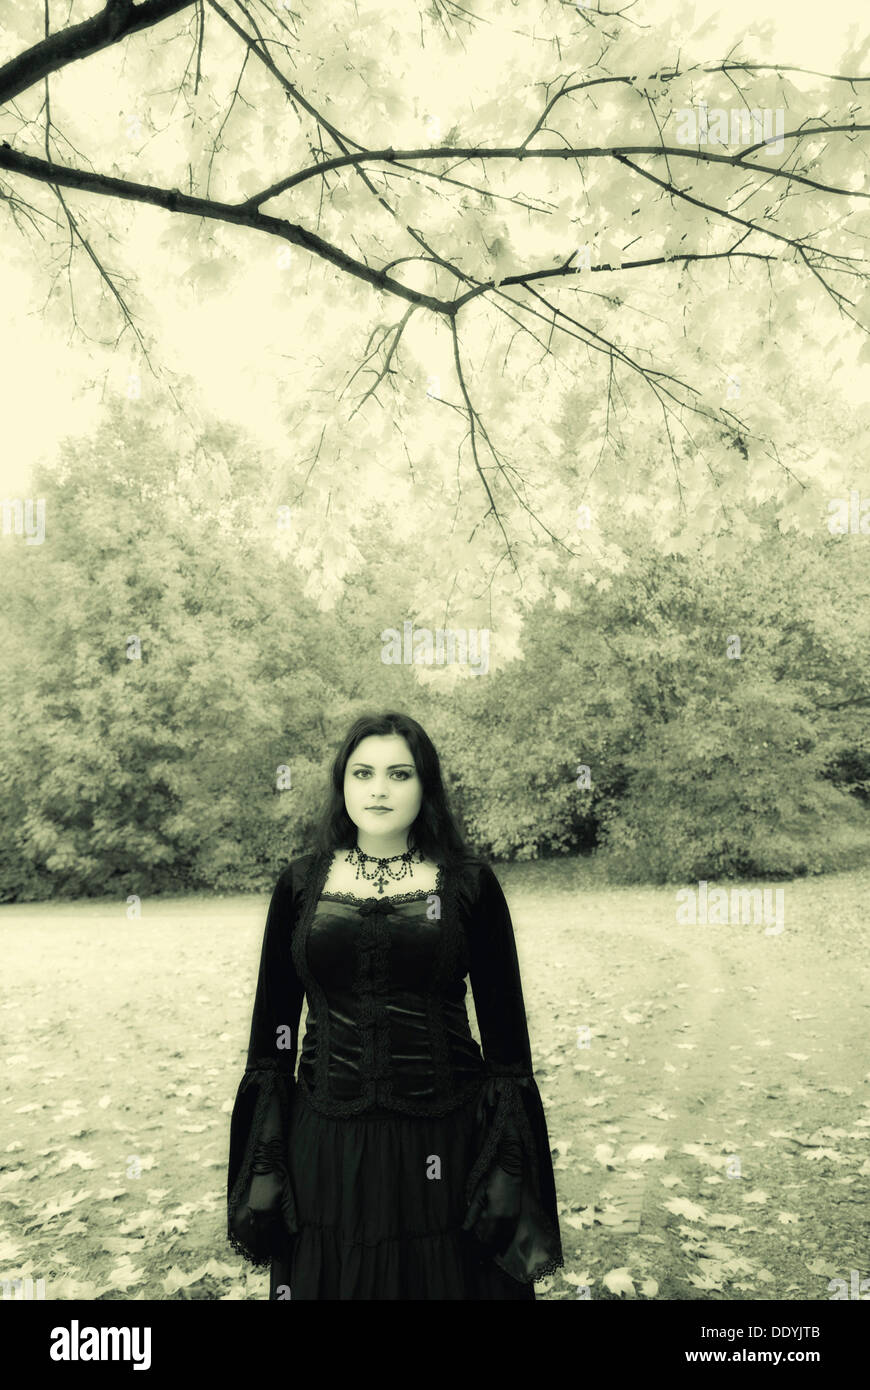 Woman, Gothic look, romantic-Gothic, standing under a tree Stock Photo